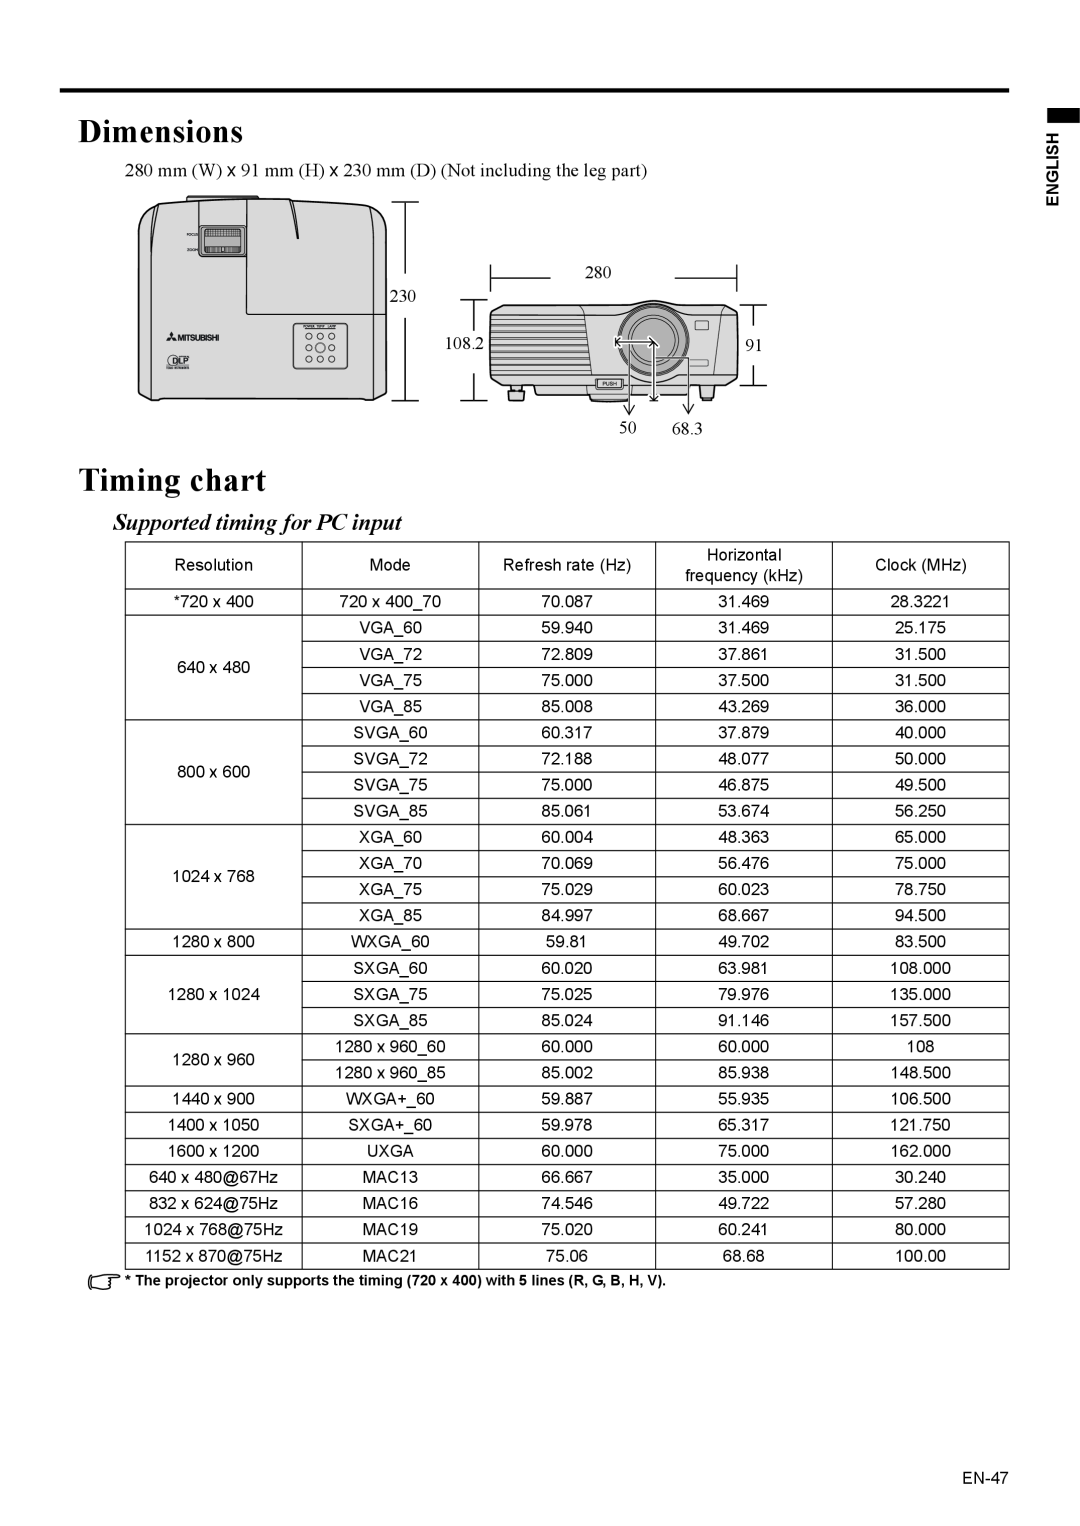 Mitsubishi Electronics EX200U user manual Dimensions, Timing chart, Supported timing for PC input 